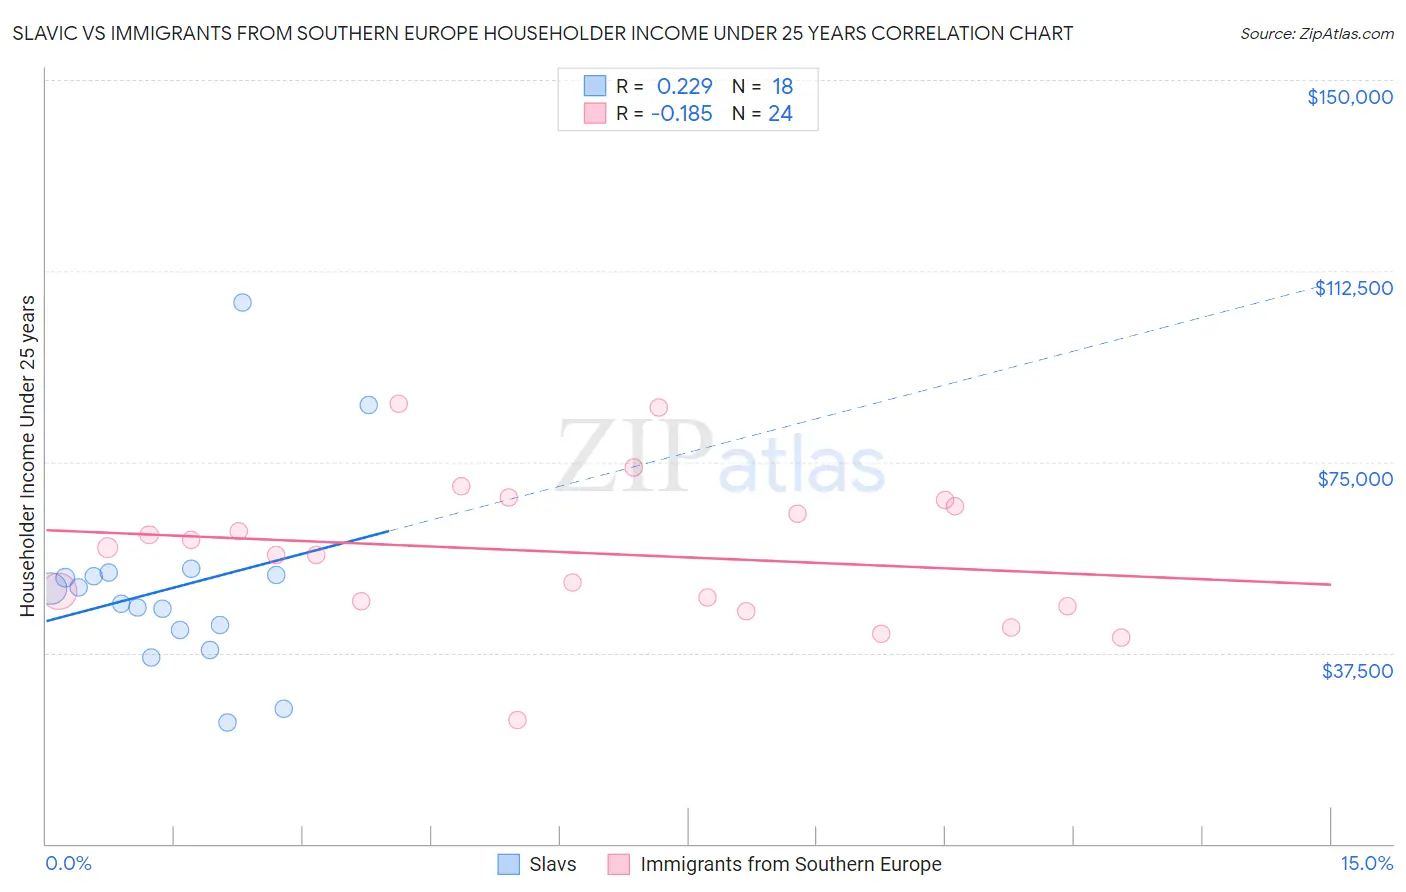 Slavic vs Immigrants from Southern Europe Householder Income Under 25 years